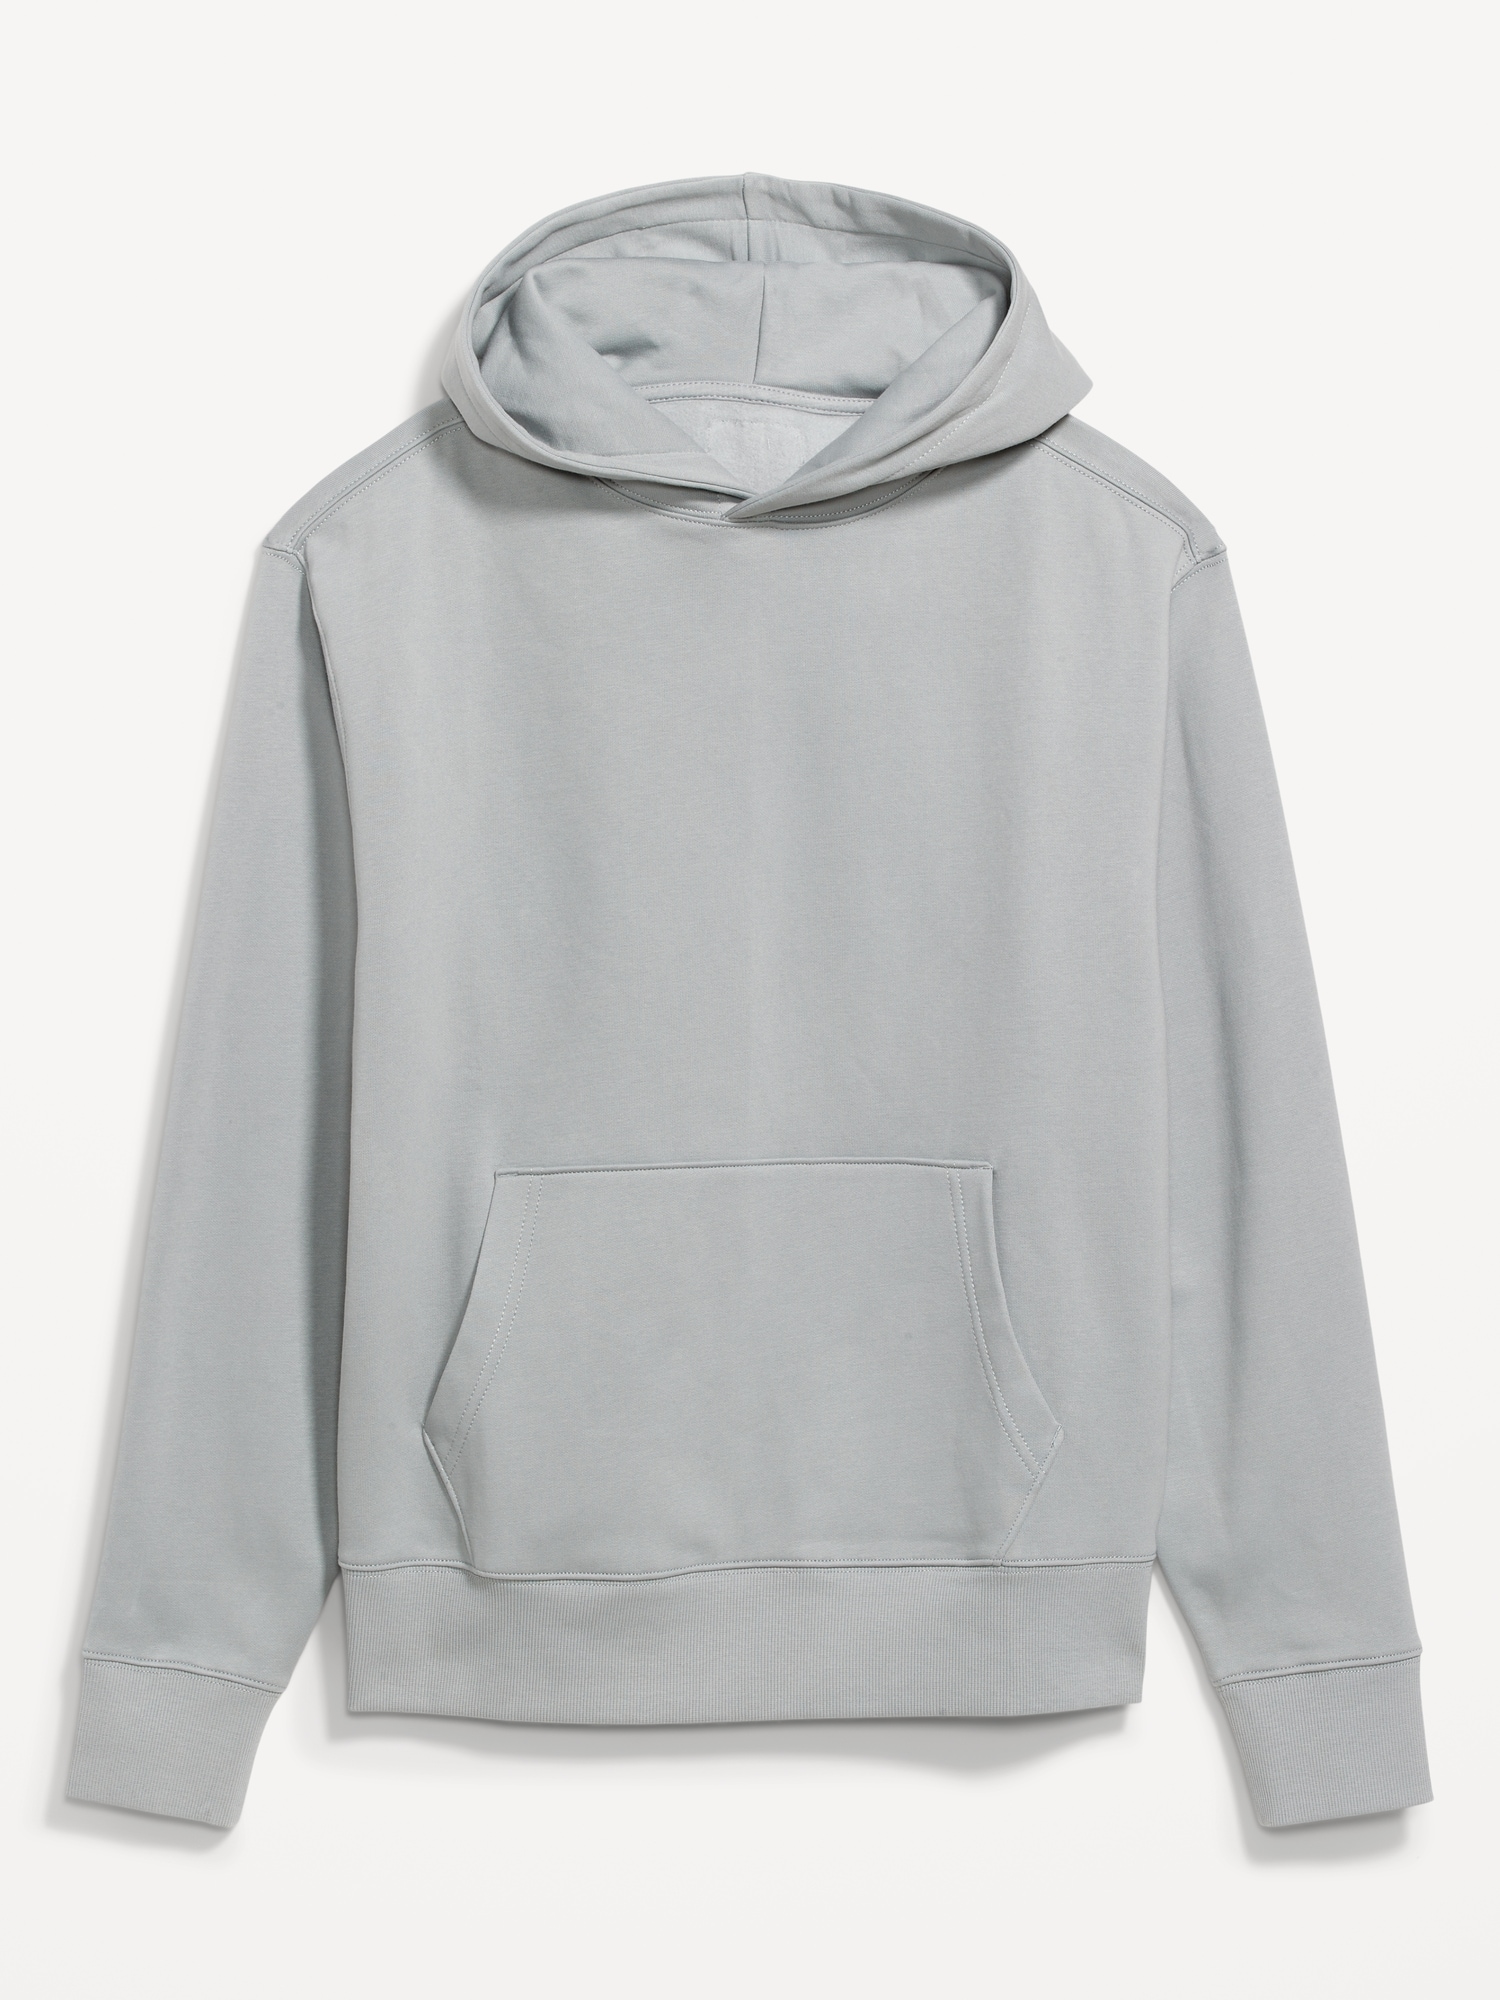 Gender-Neutral Pullover Hoodie for Adults | Old Navy